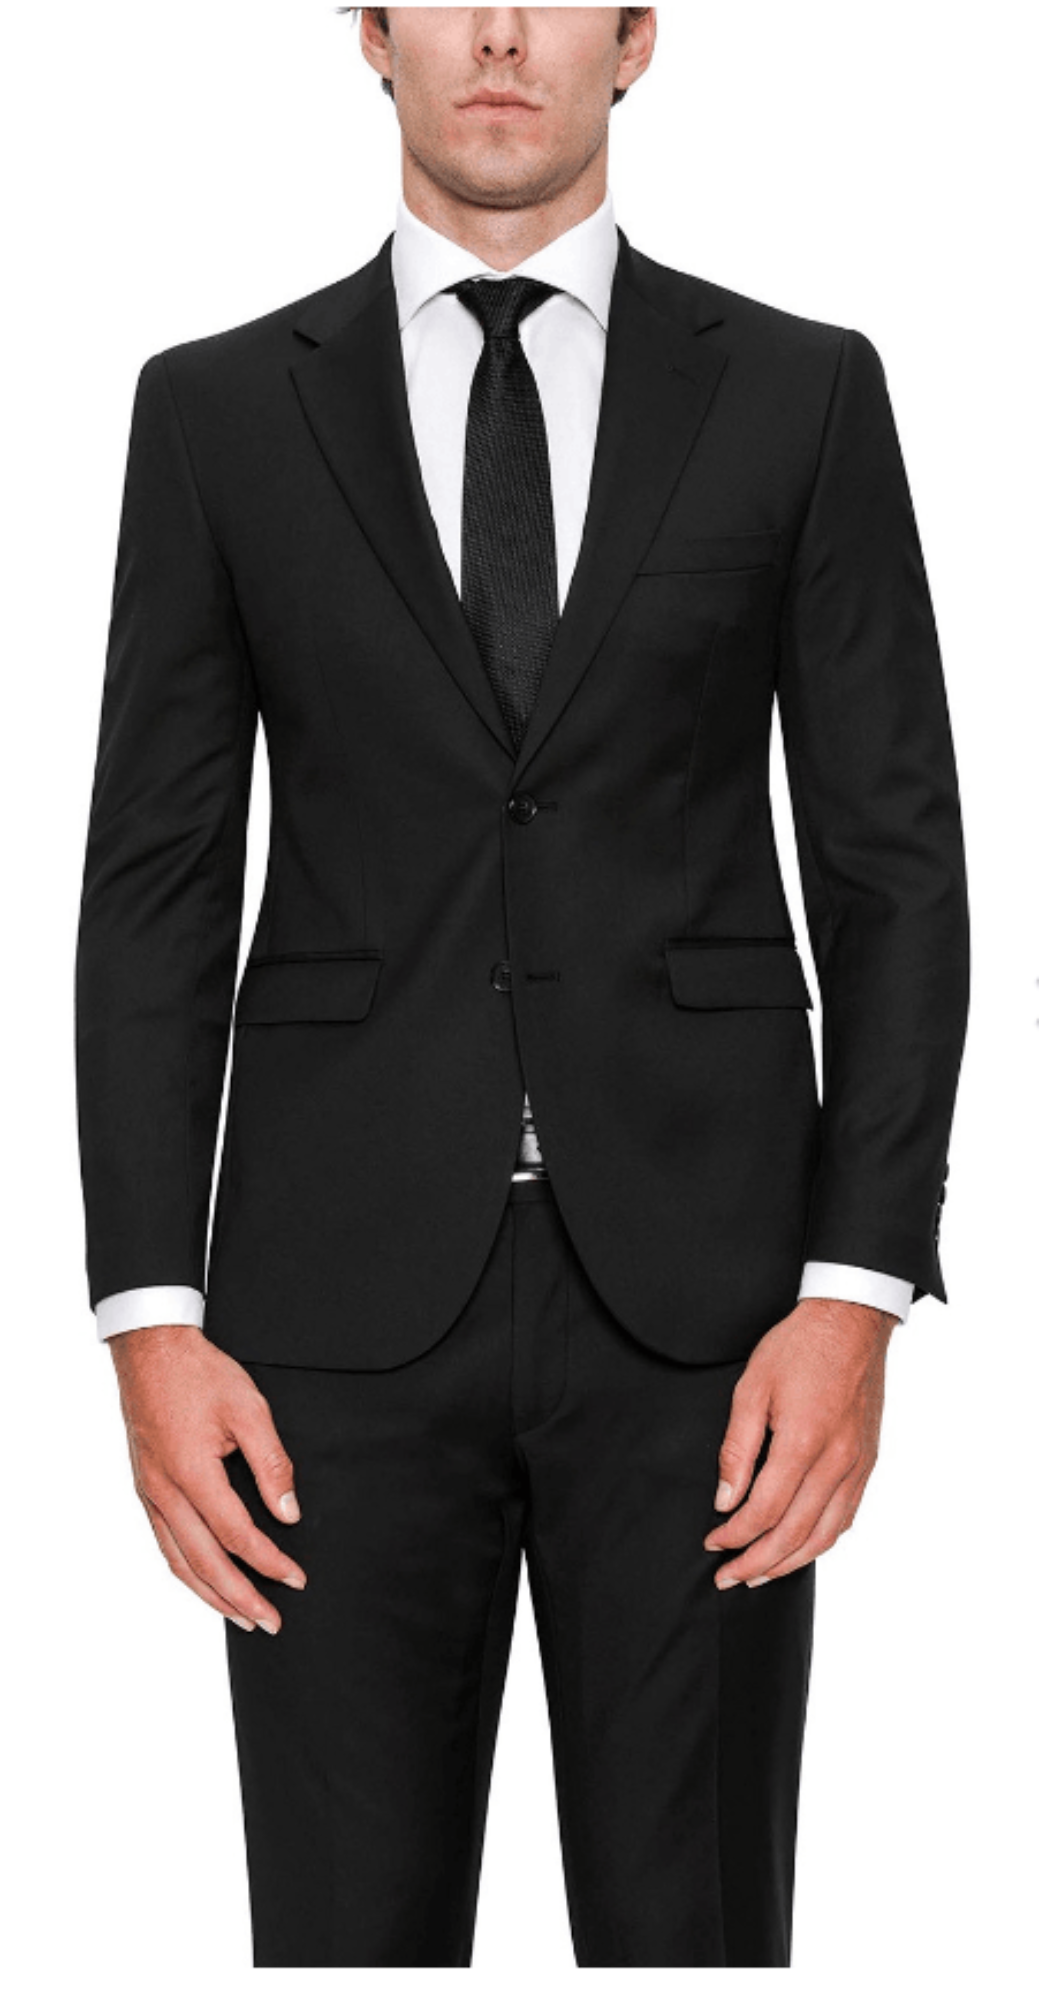 Serra Suit Jacket  https://harrysformenswear.com.au/products/serra-pyef0003c1  The Serra Suit Jacket (sold separately) In a high-performance stretch fabric adds comfort and elevates your office style. To Complete the Omsomblo wear with the FYF001 Jura Trouser and FYF001 Taurus Vest 68% polyester 29% viscose 3% elastane Tailored fit Fully lined Single breasted two button front Notch lapel Straight…